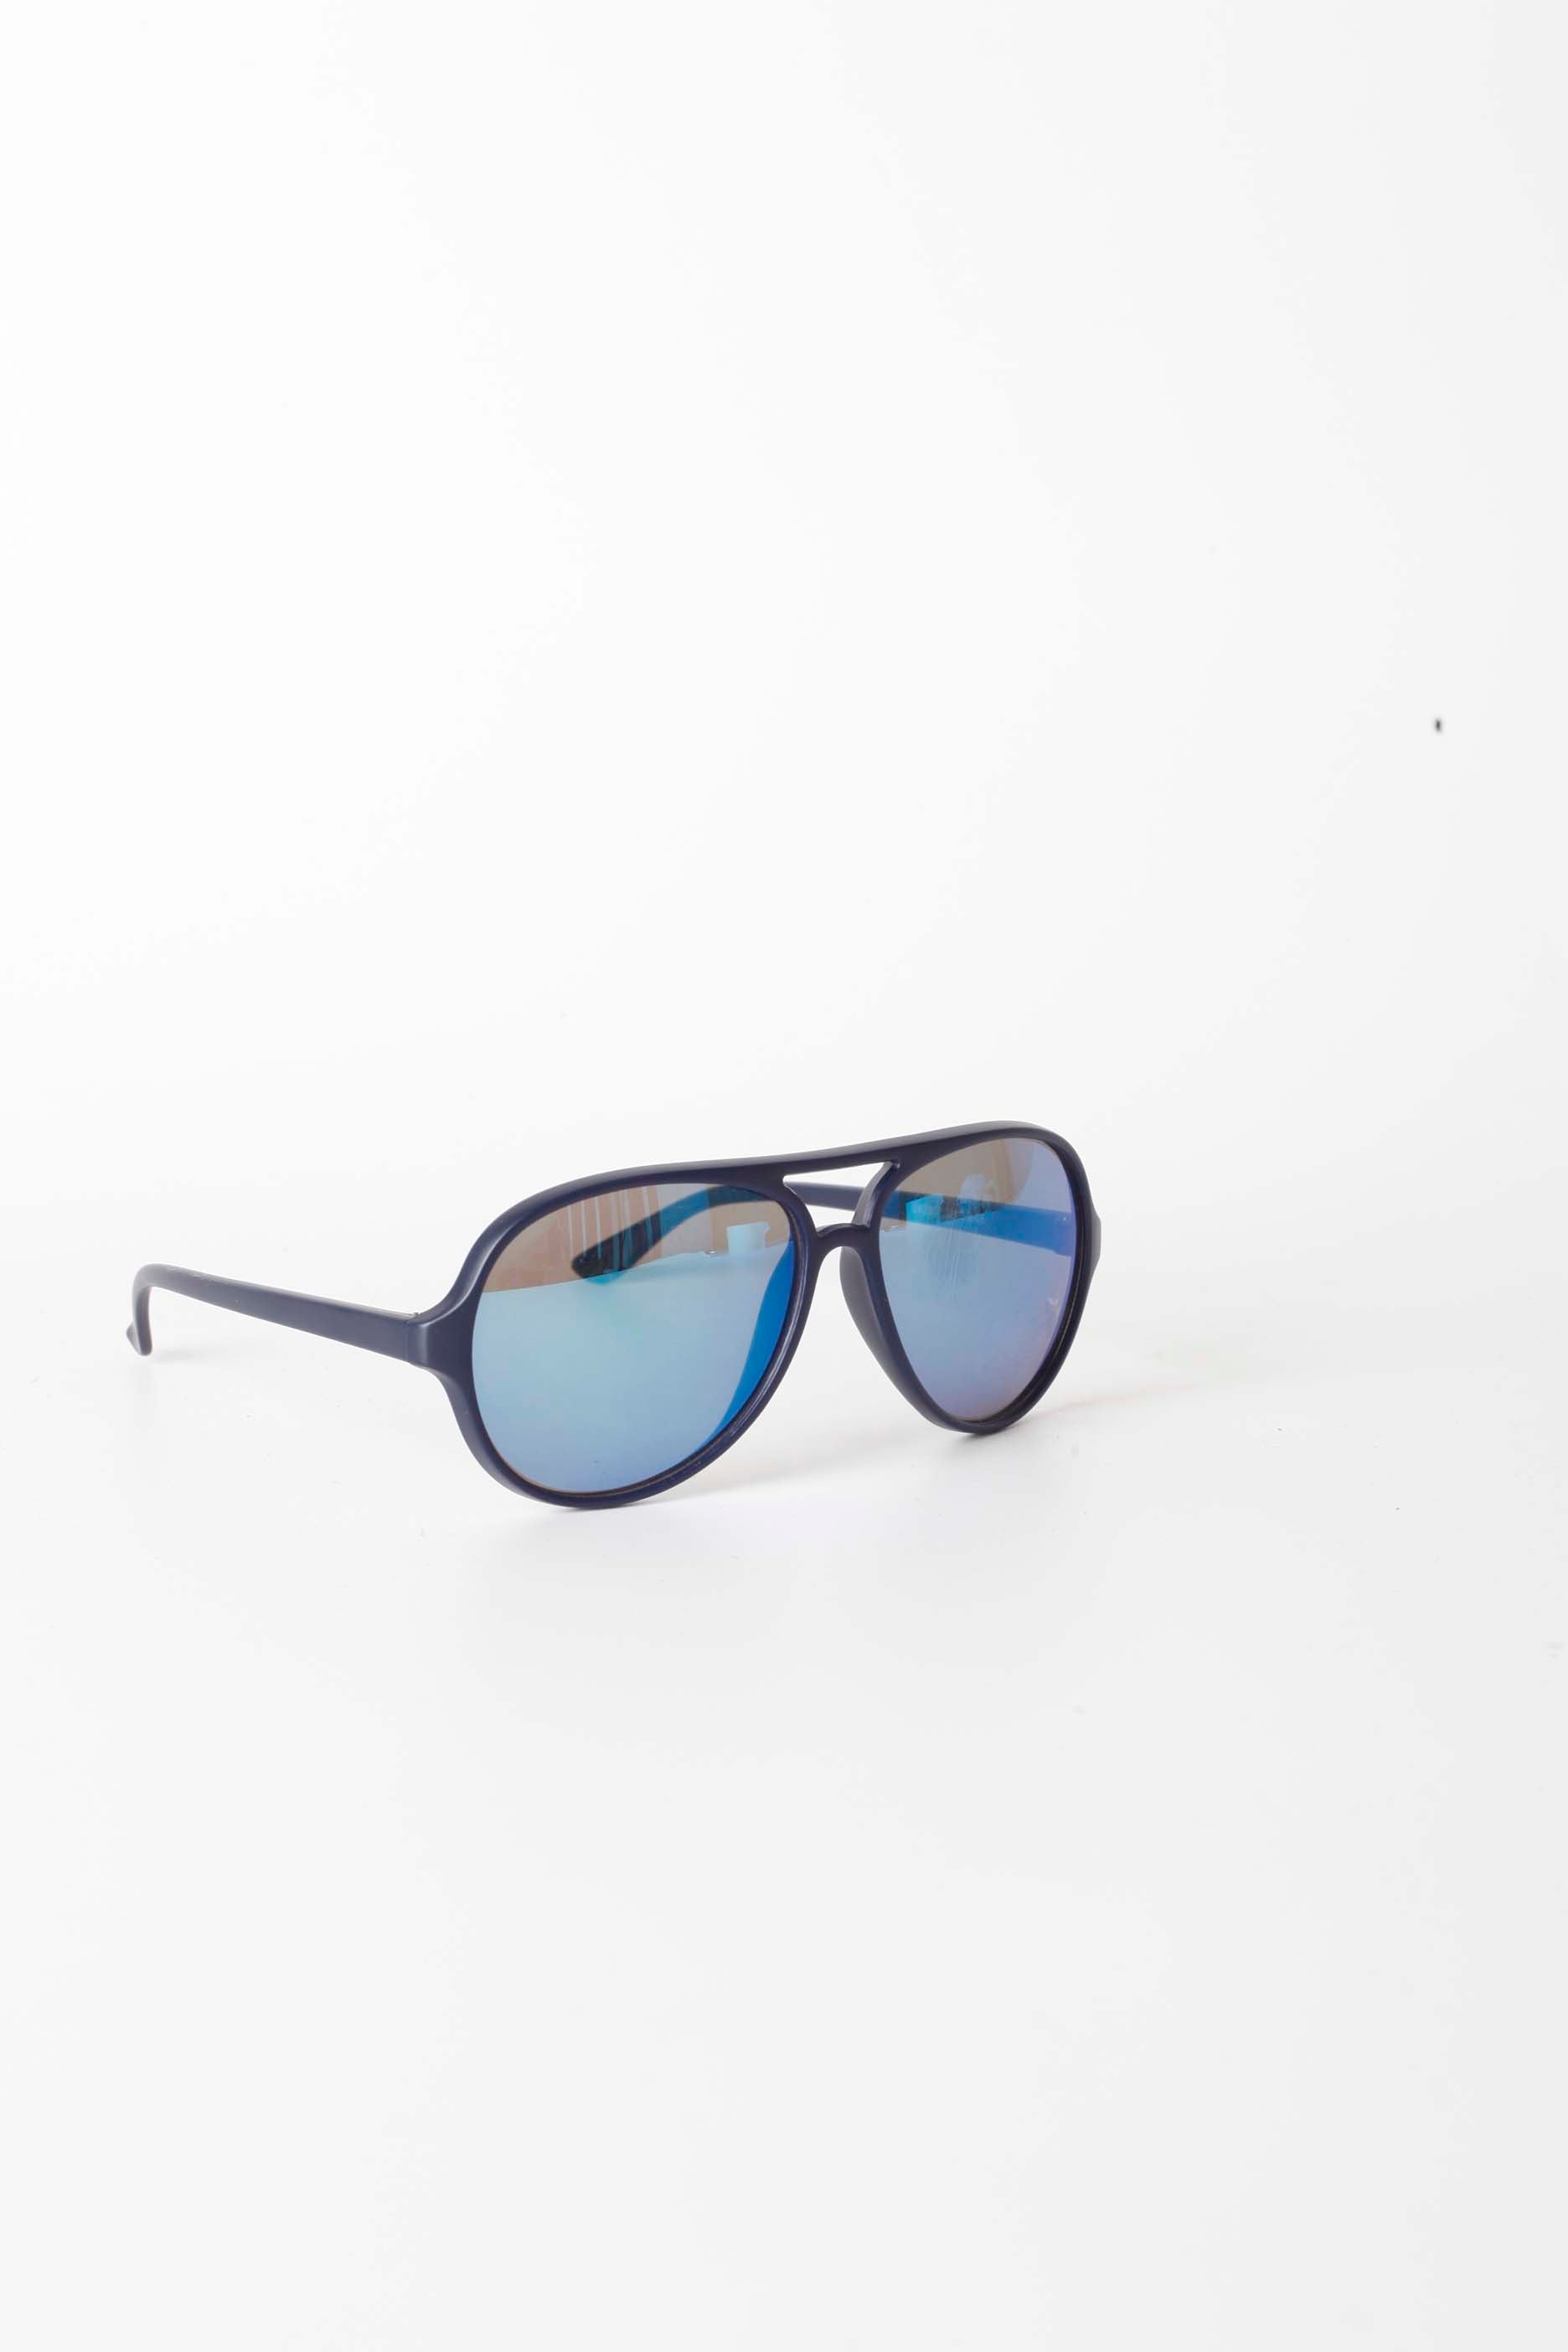 Black Round Sunglasses with Blue Tint